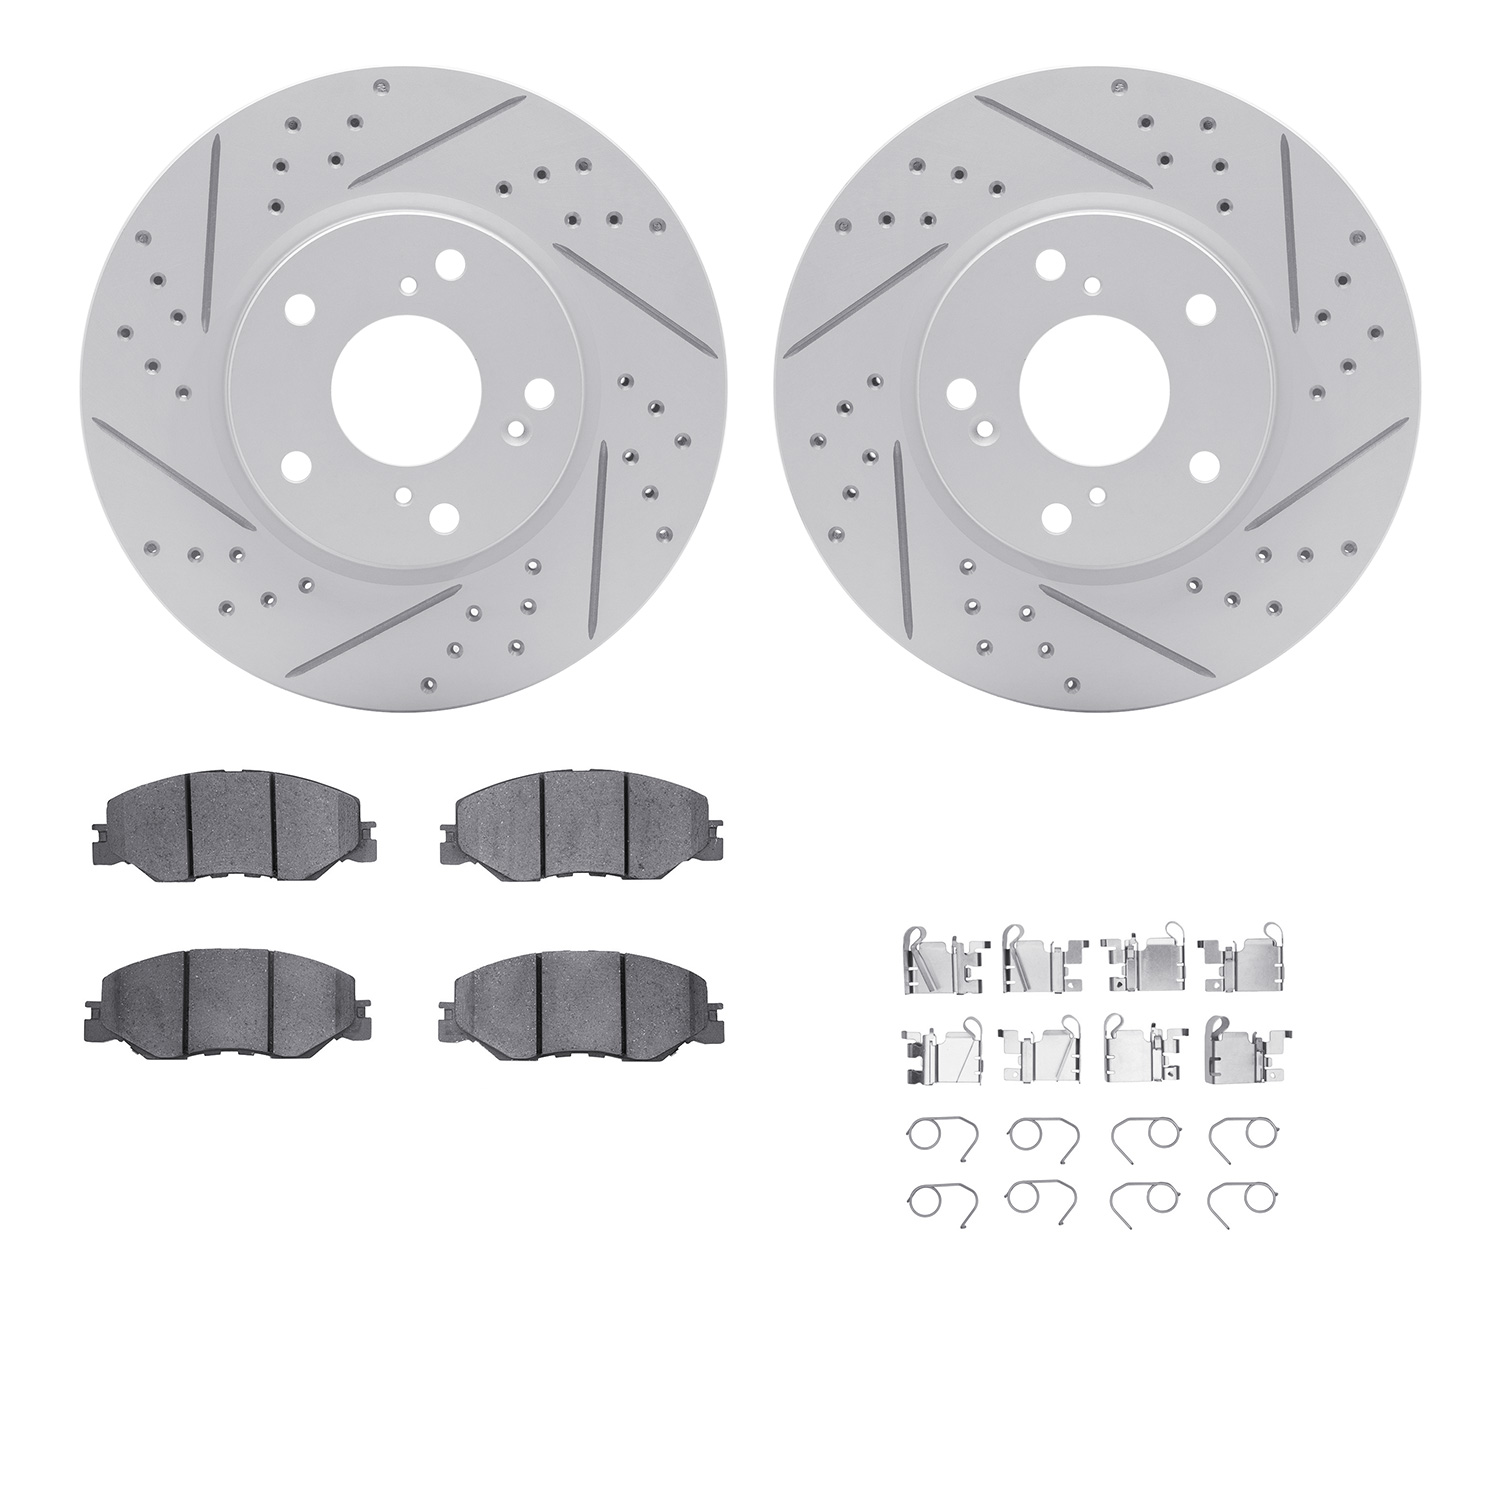 2512-59093 Geoperformance Drilled/Slotted Rotors w/5000 Advanced Brake Pads Kit & Hardware, Fits Select Acura/Honda, Position: F